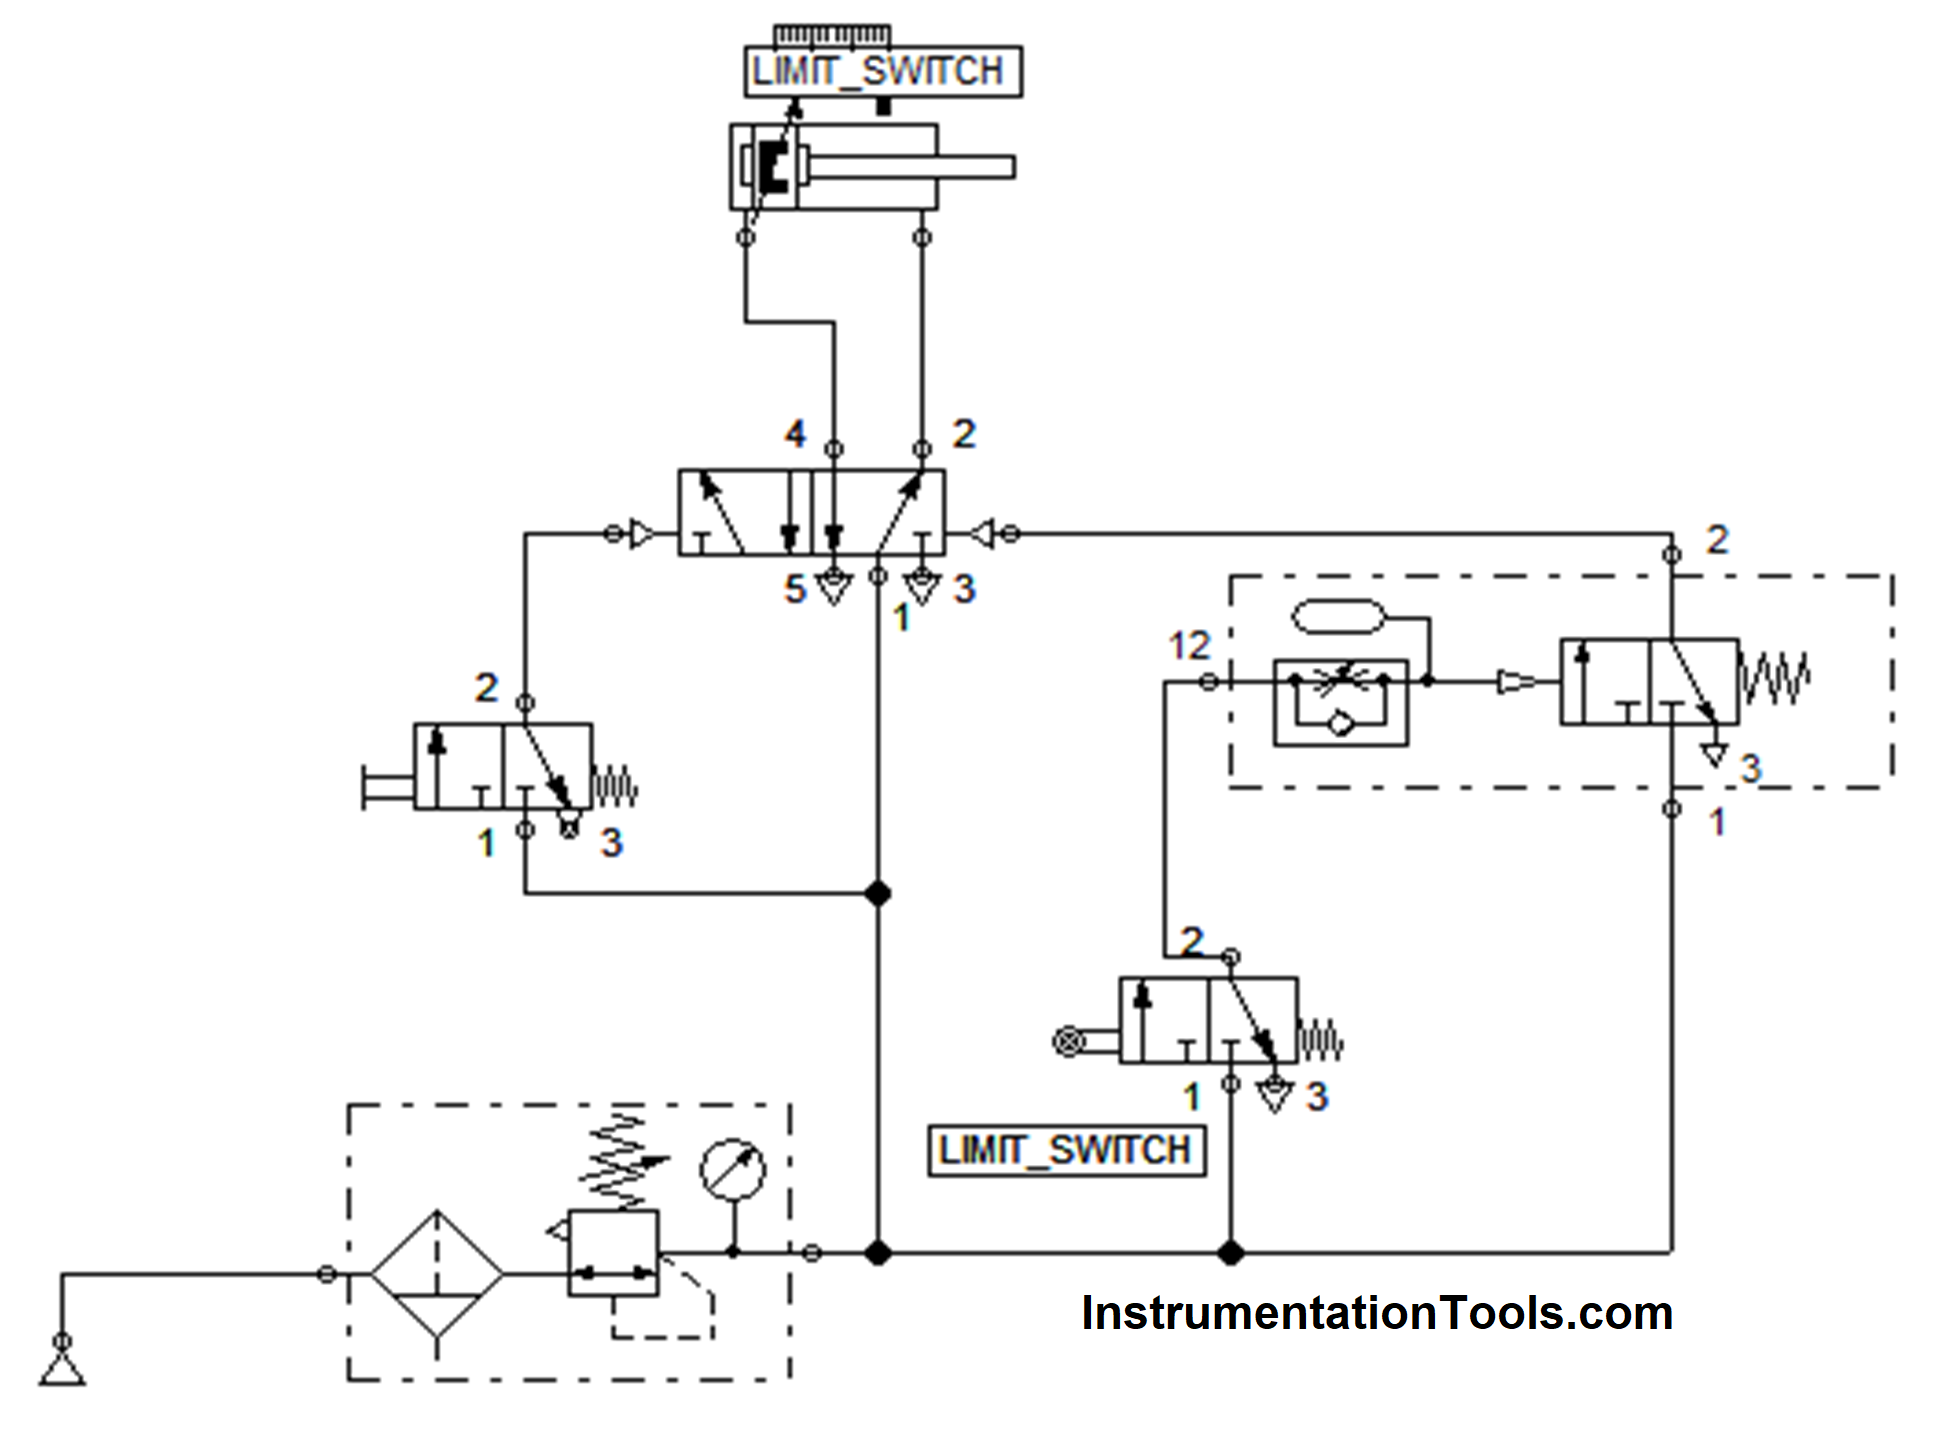 Pneumatic system control with timer